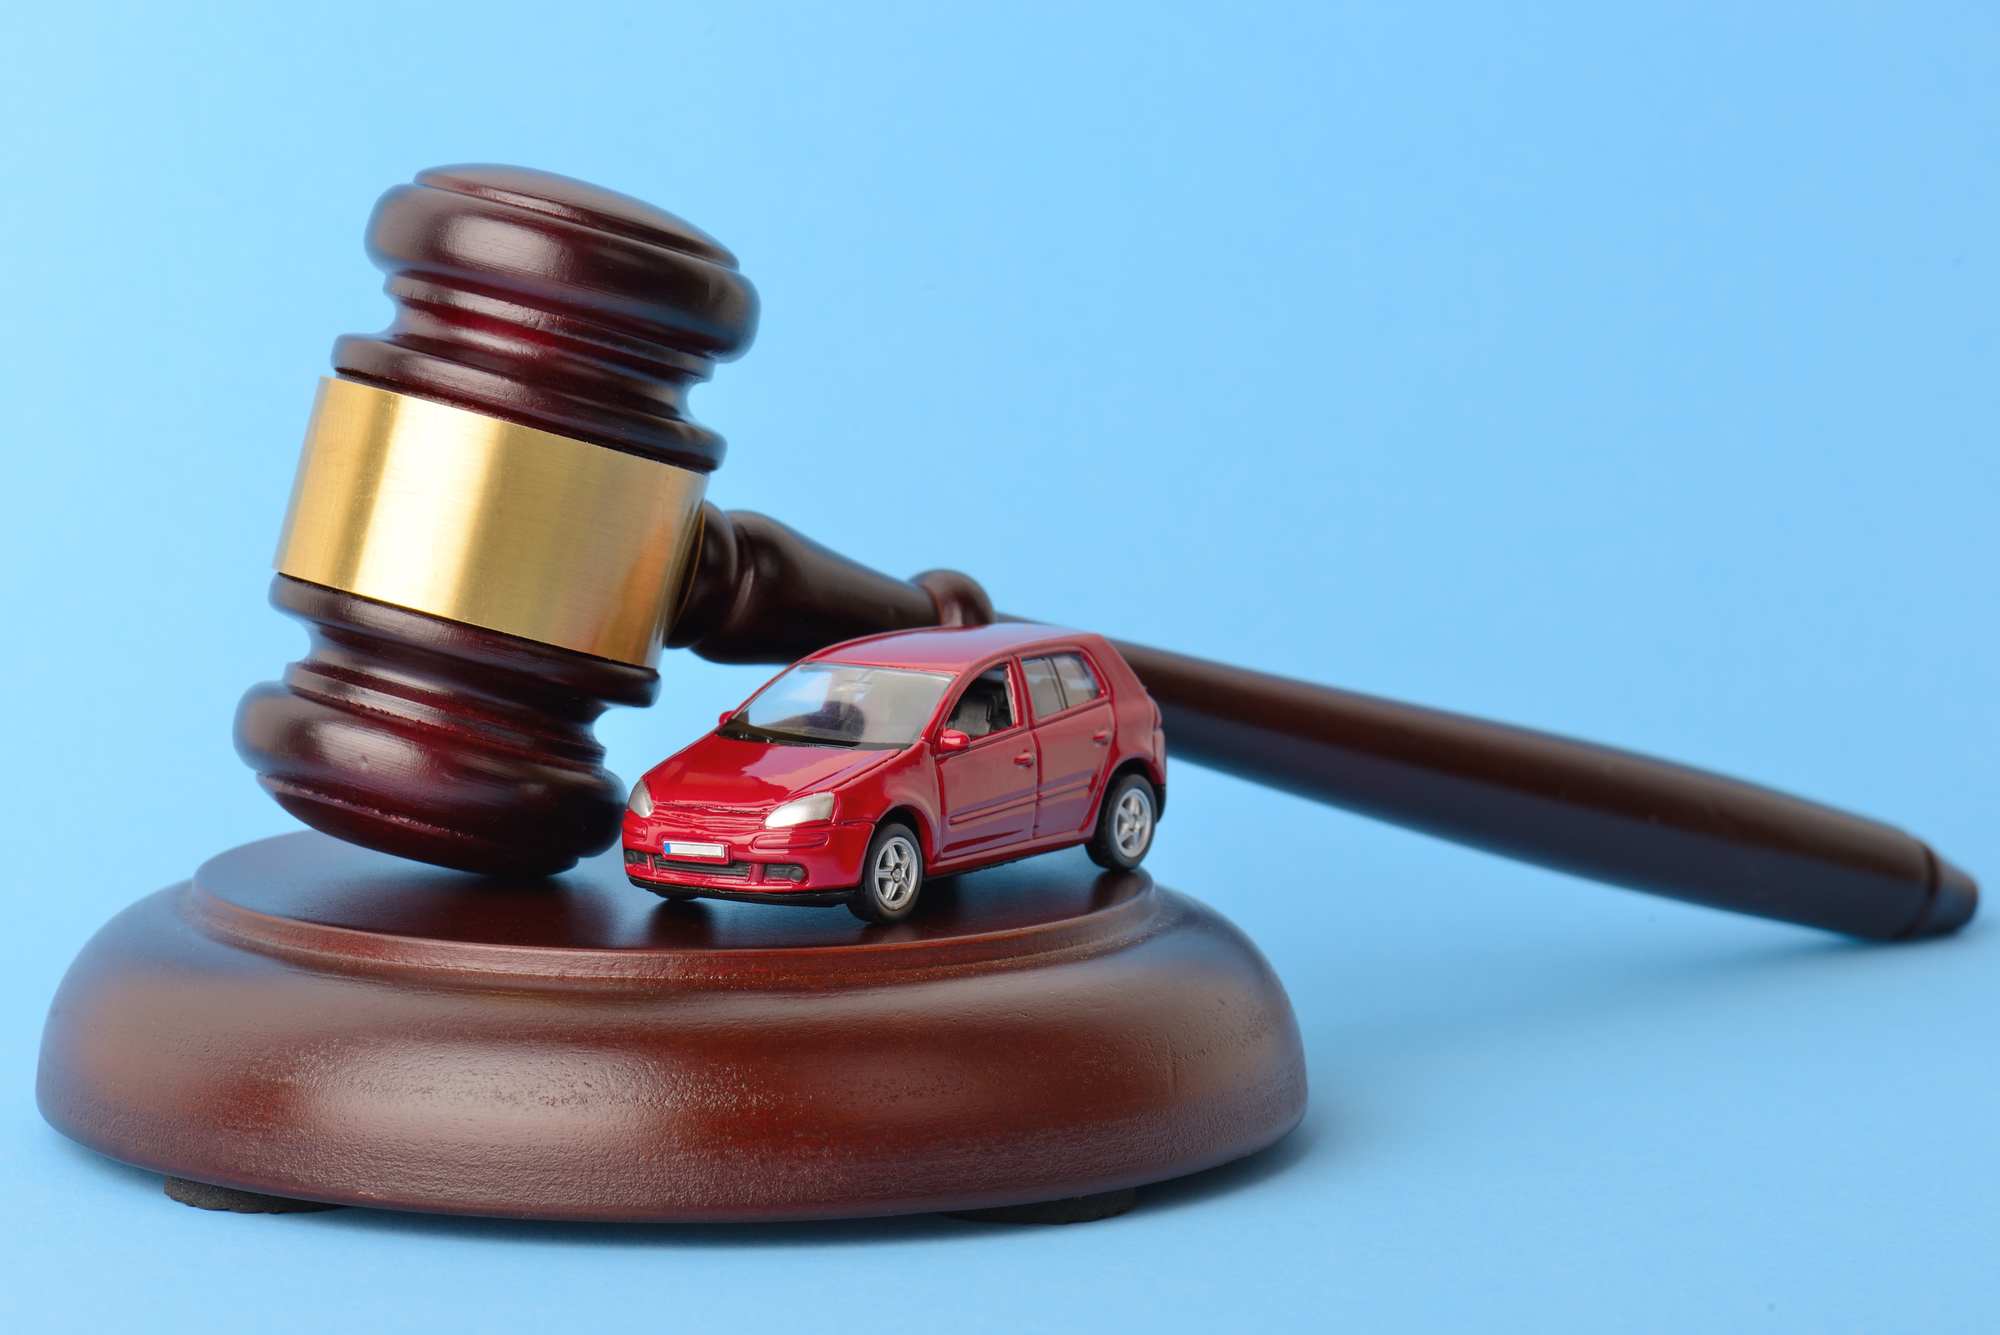  motor vehicle accident legal representation near me           